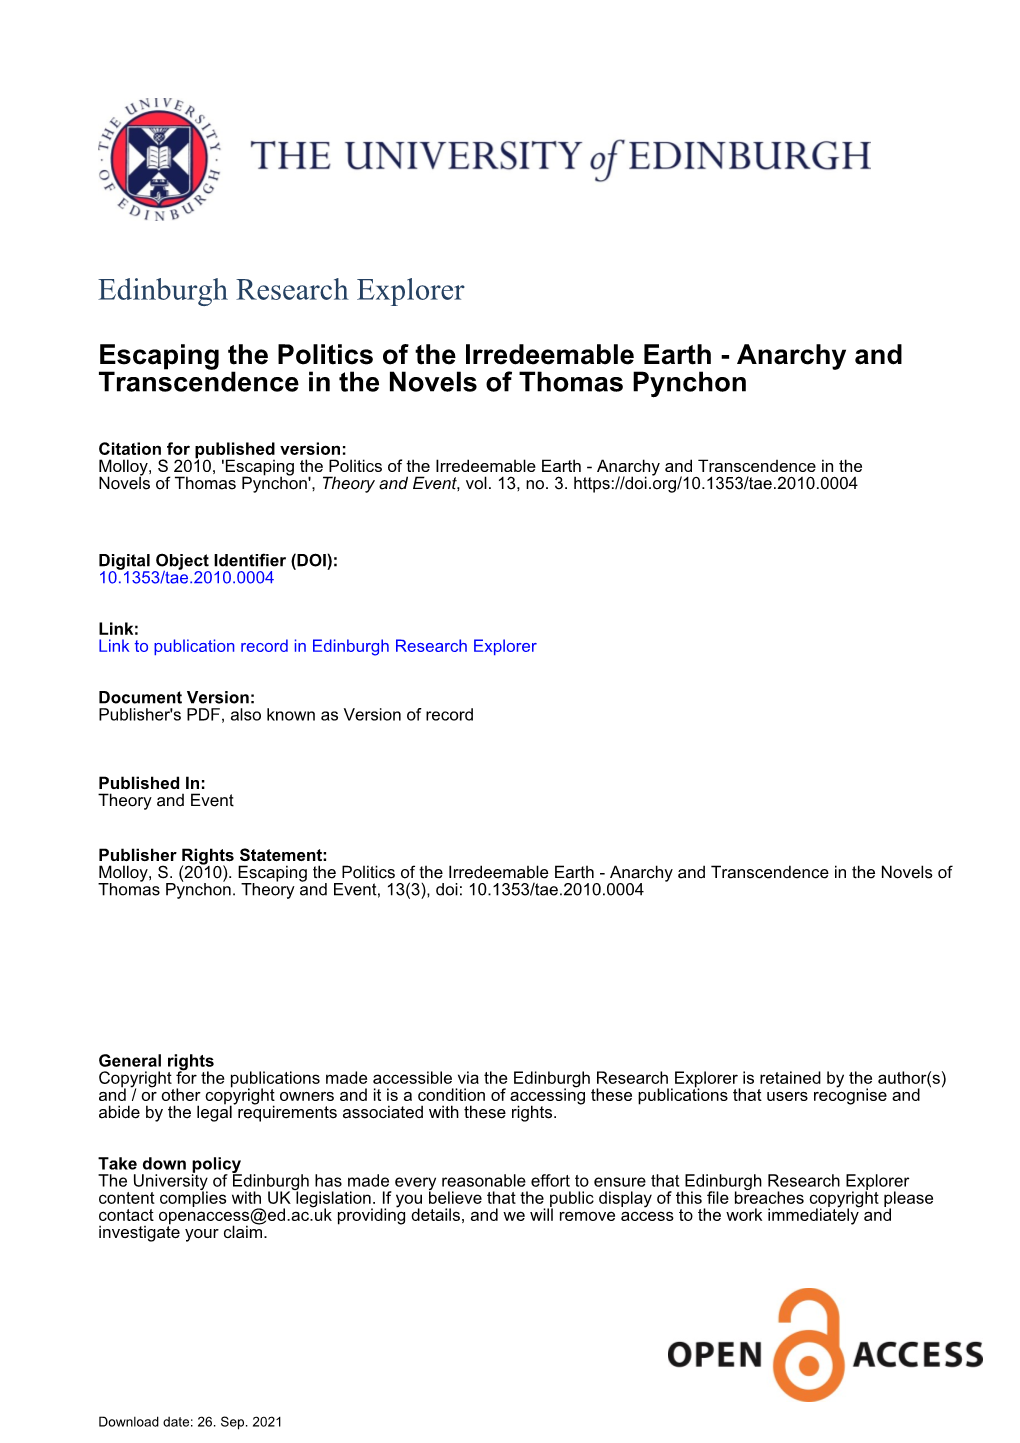 Anarchy and Transcendence in the Novels of Thomas Pynchon', Theory and Event, Vol